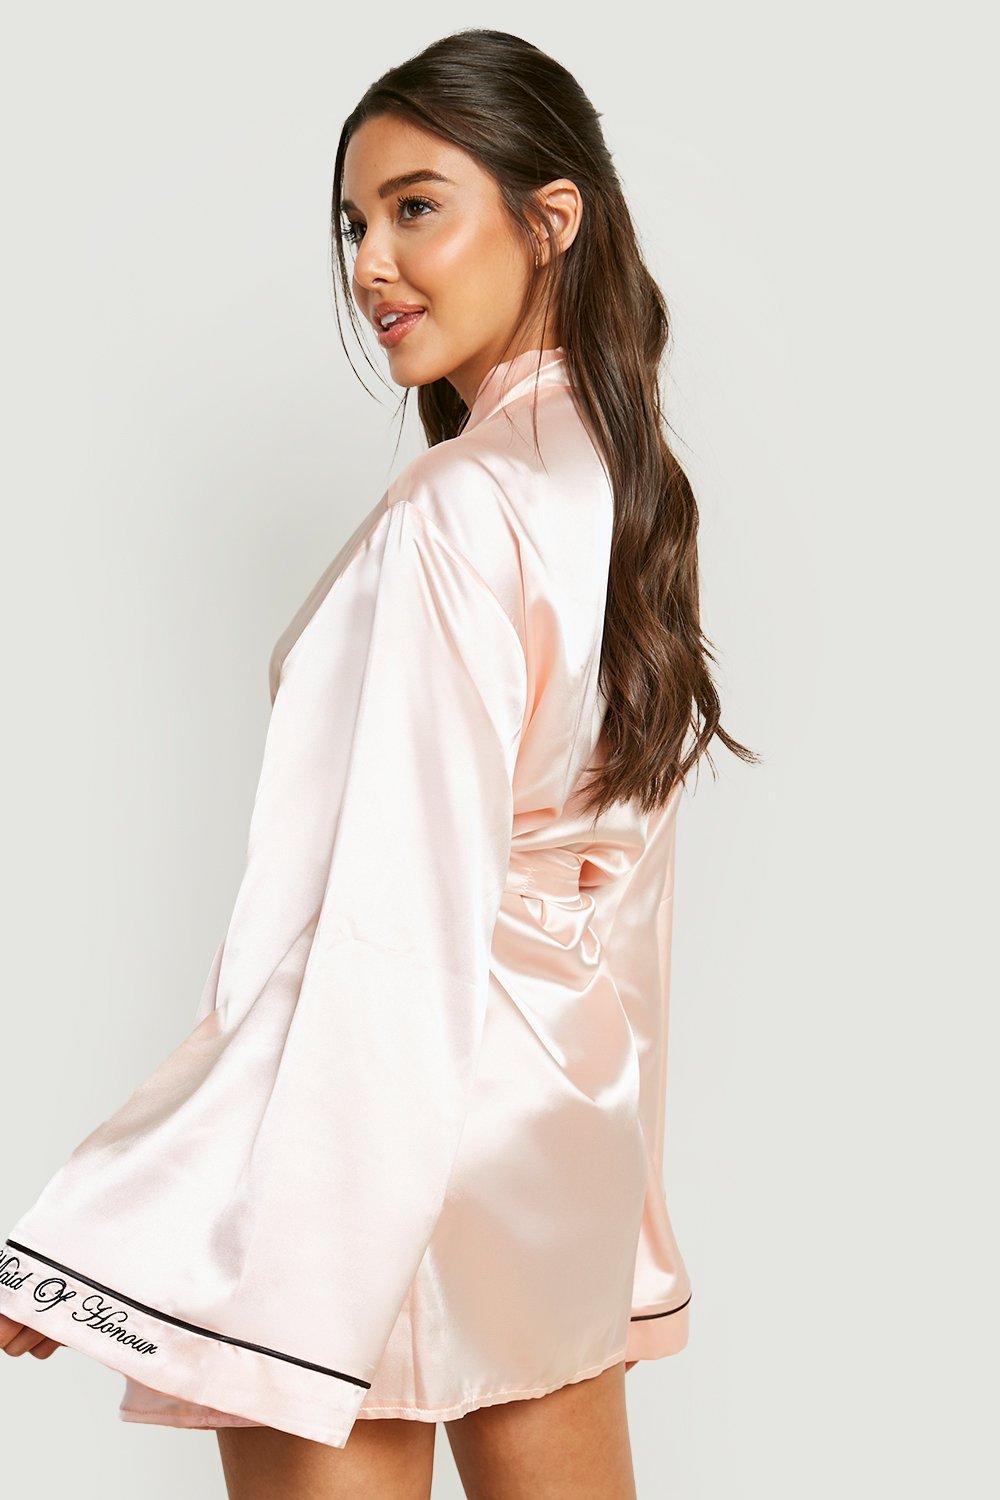 Boohoo Synthetic Maid Of Honour Embroidered Kimono Robe in Rose Gold Womens Clothing Nightwear and sleepwear Robes Natural robe dresses and bathrobes 